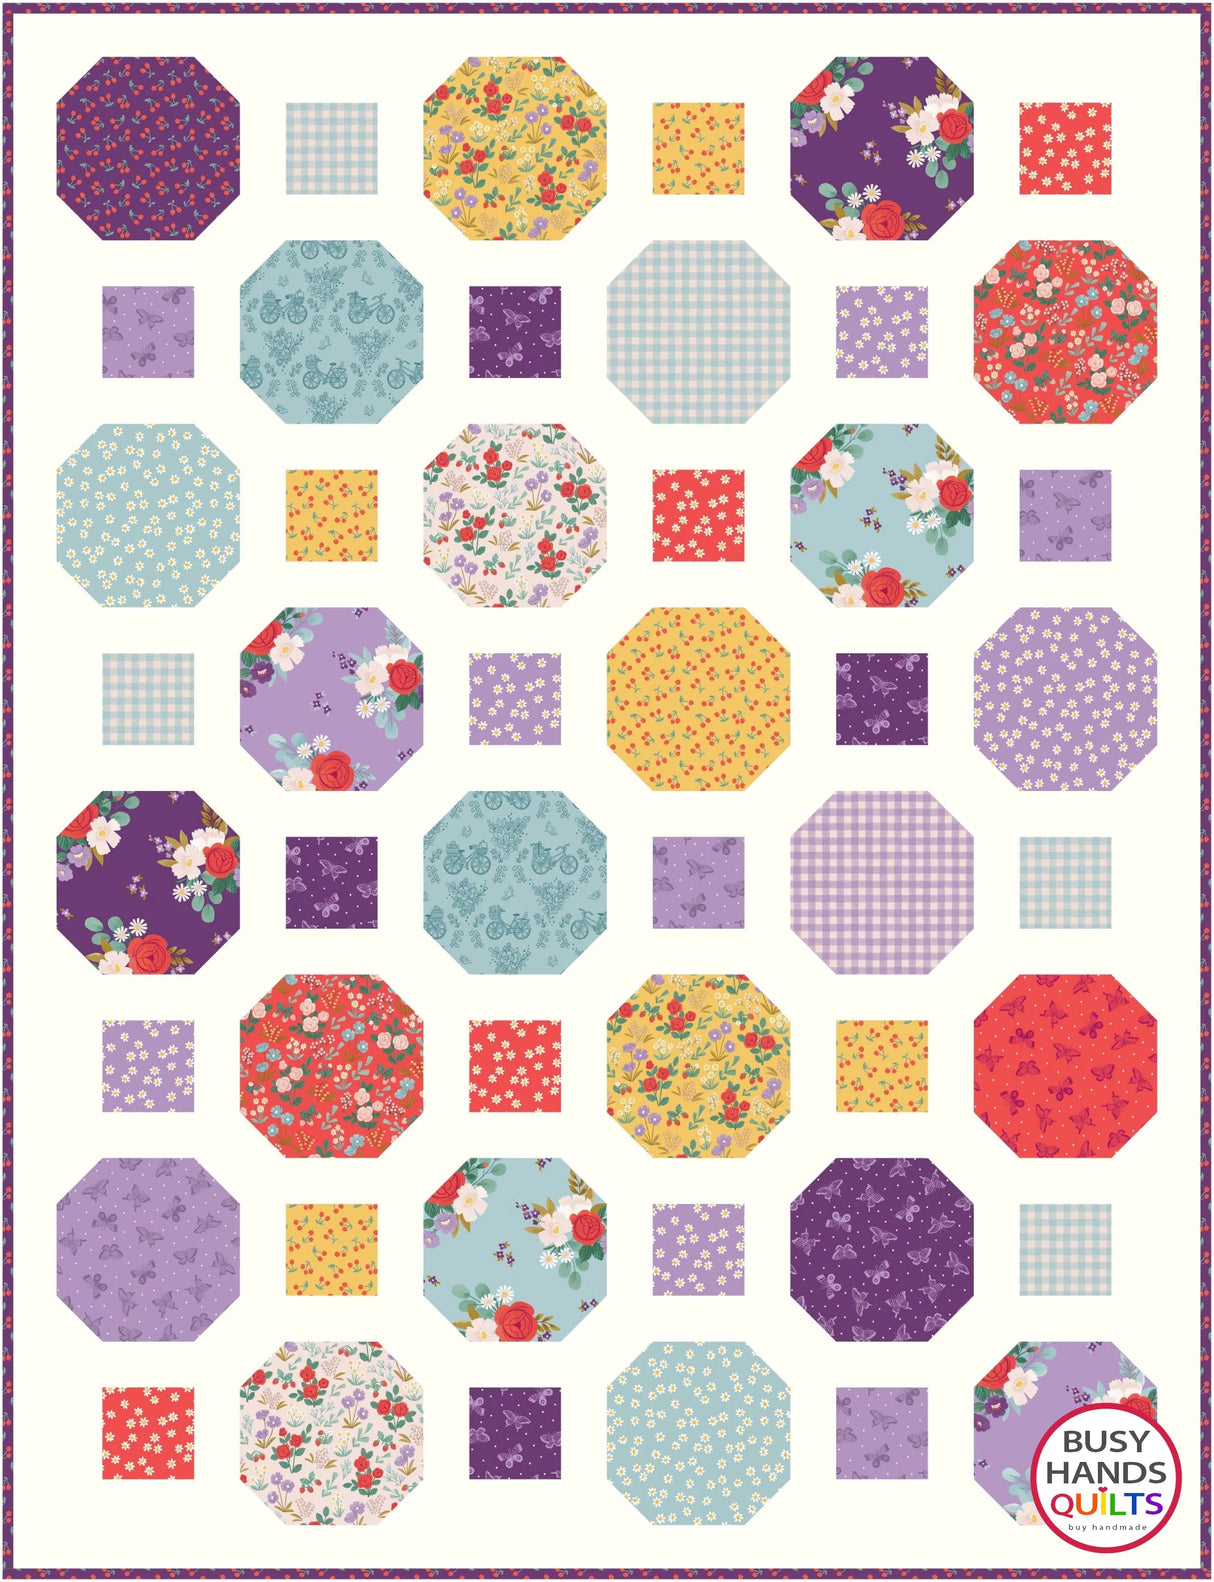 Rolling Around Quilt Pattern by Busy Hands